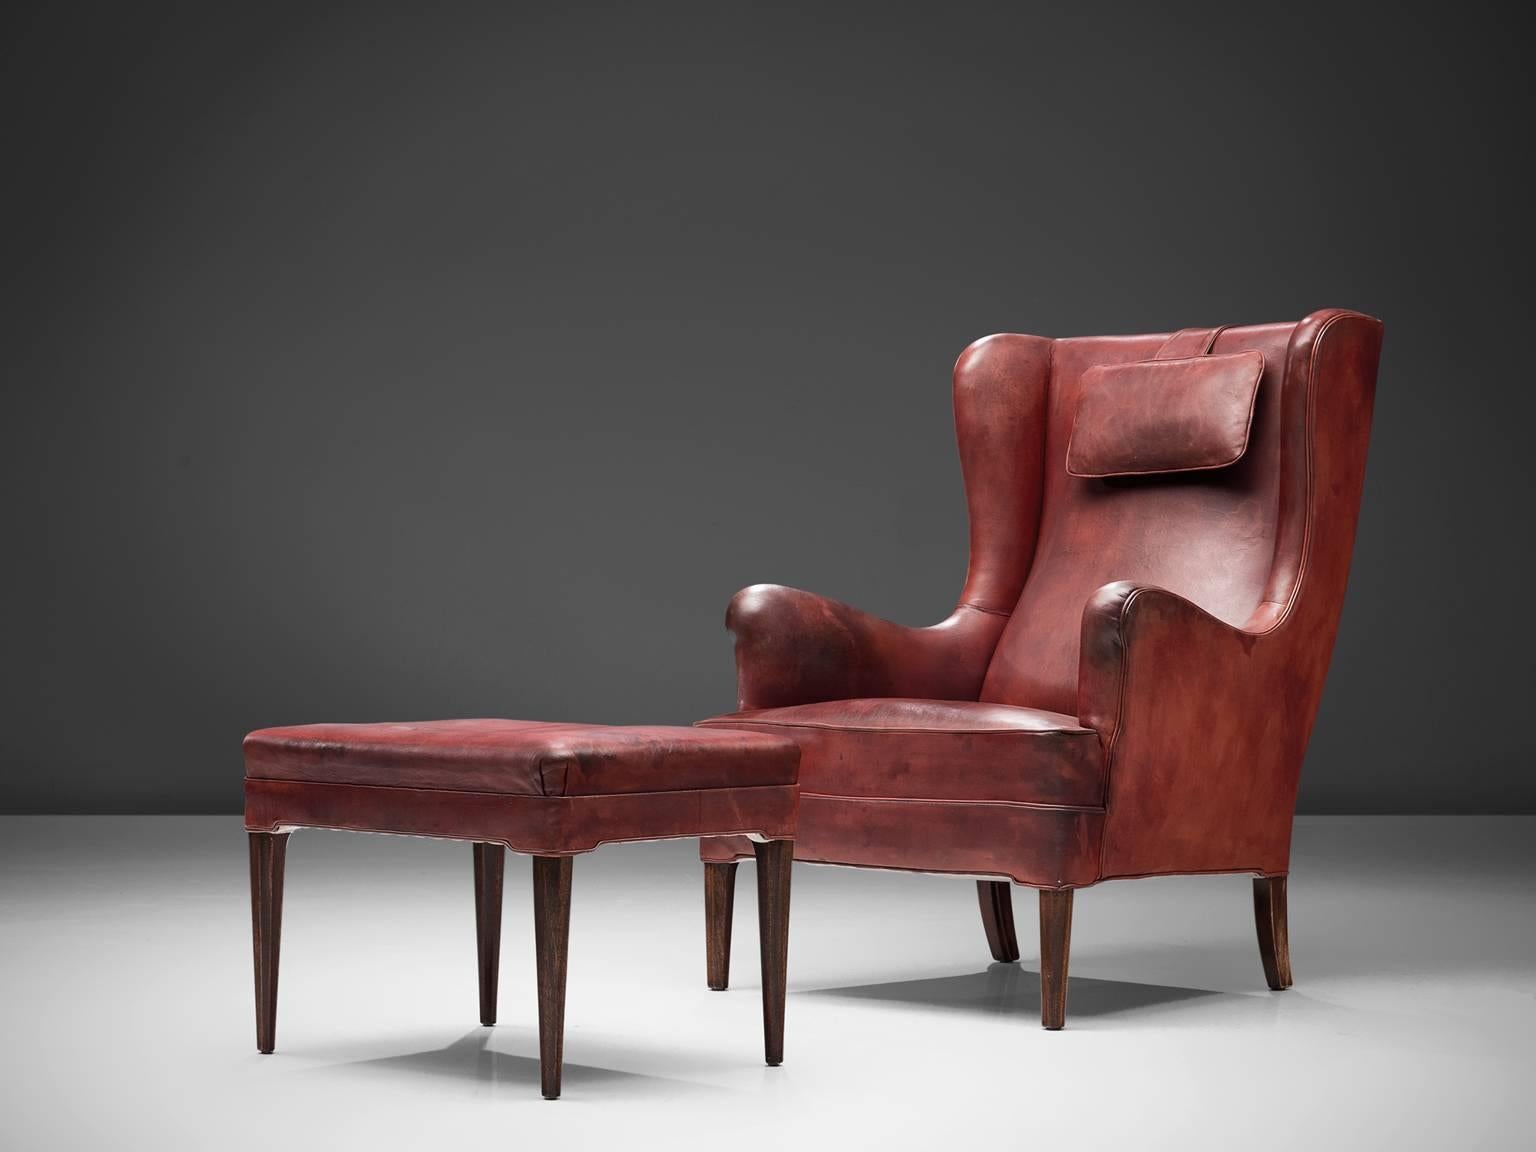 Frits Henningsen, wingback chair and ottoman, red cognac leather and wood, by Denmark, 1940s.

Classical wingback chair with accompanying footstool in patinated cognac leather. This chair and ottoman hold their original cognac leather upholstery.